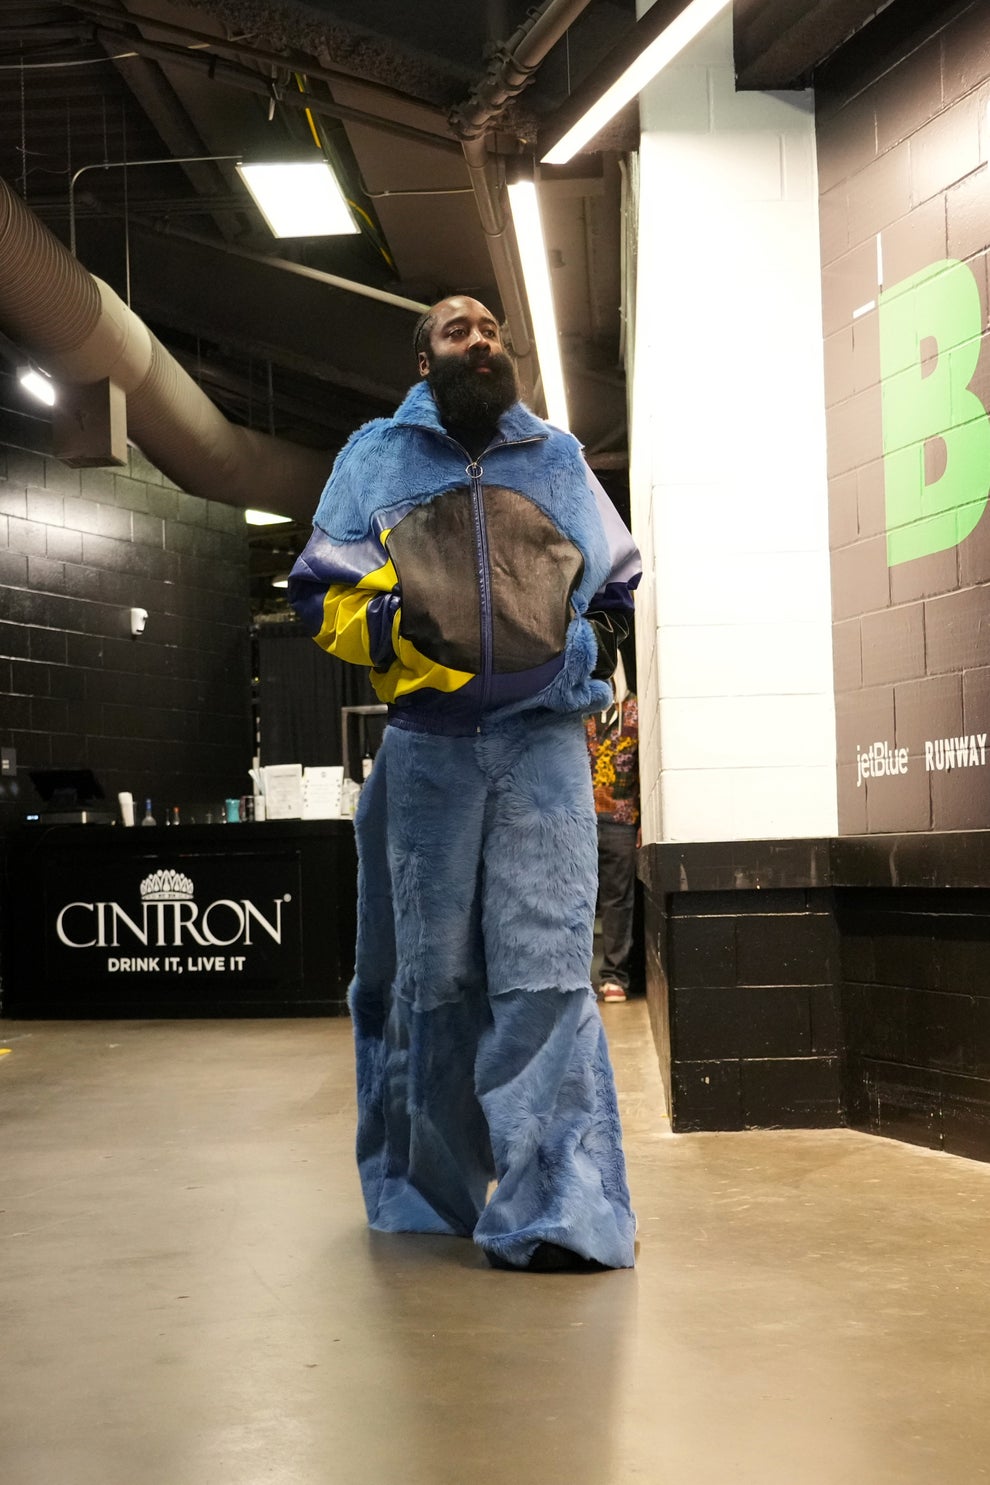 The James Harden outfit trend continues after Game 4 : r/sixers